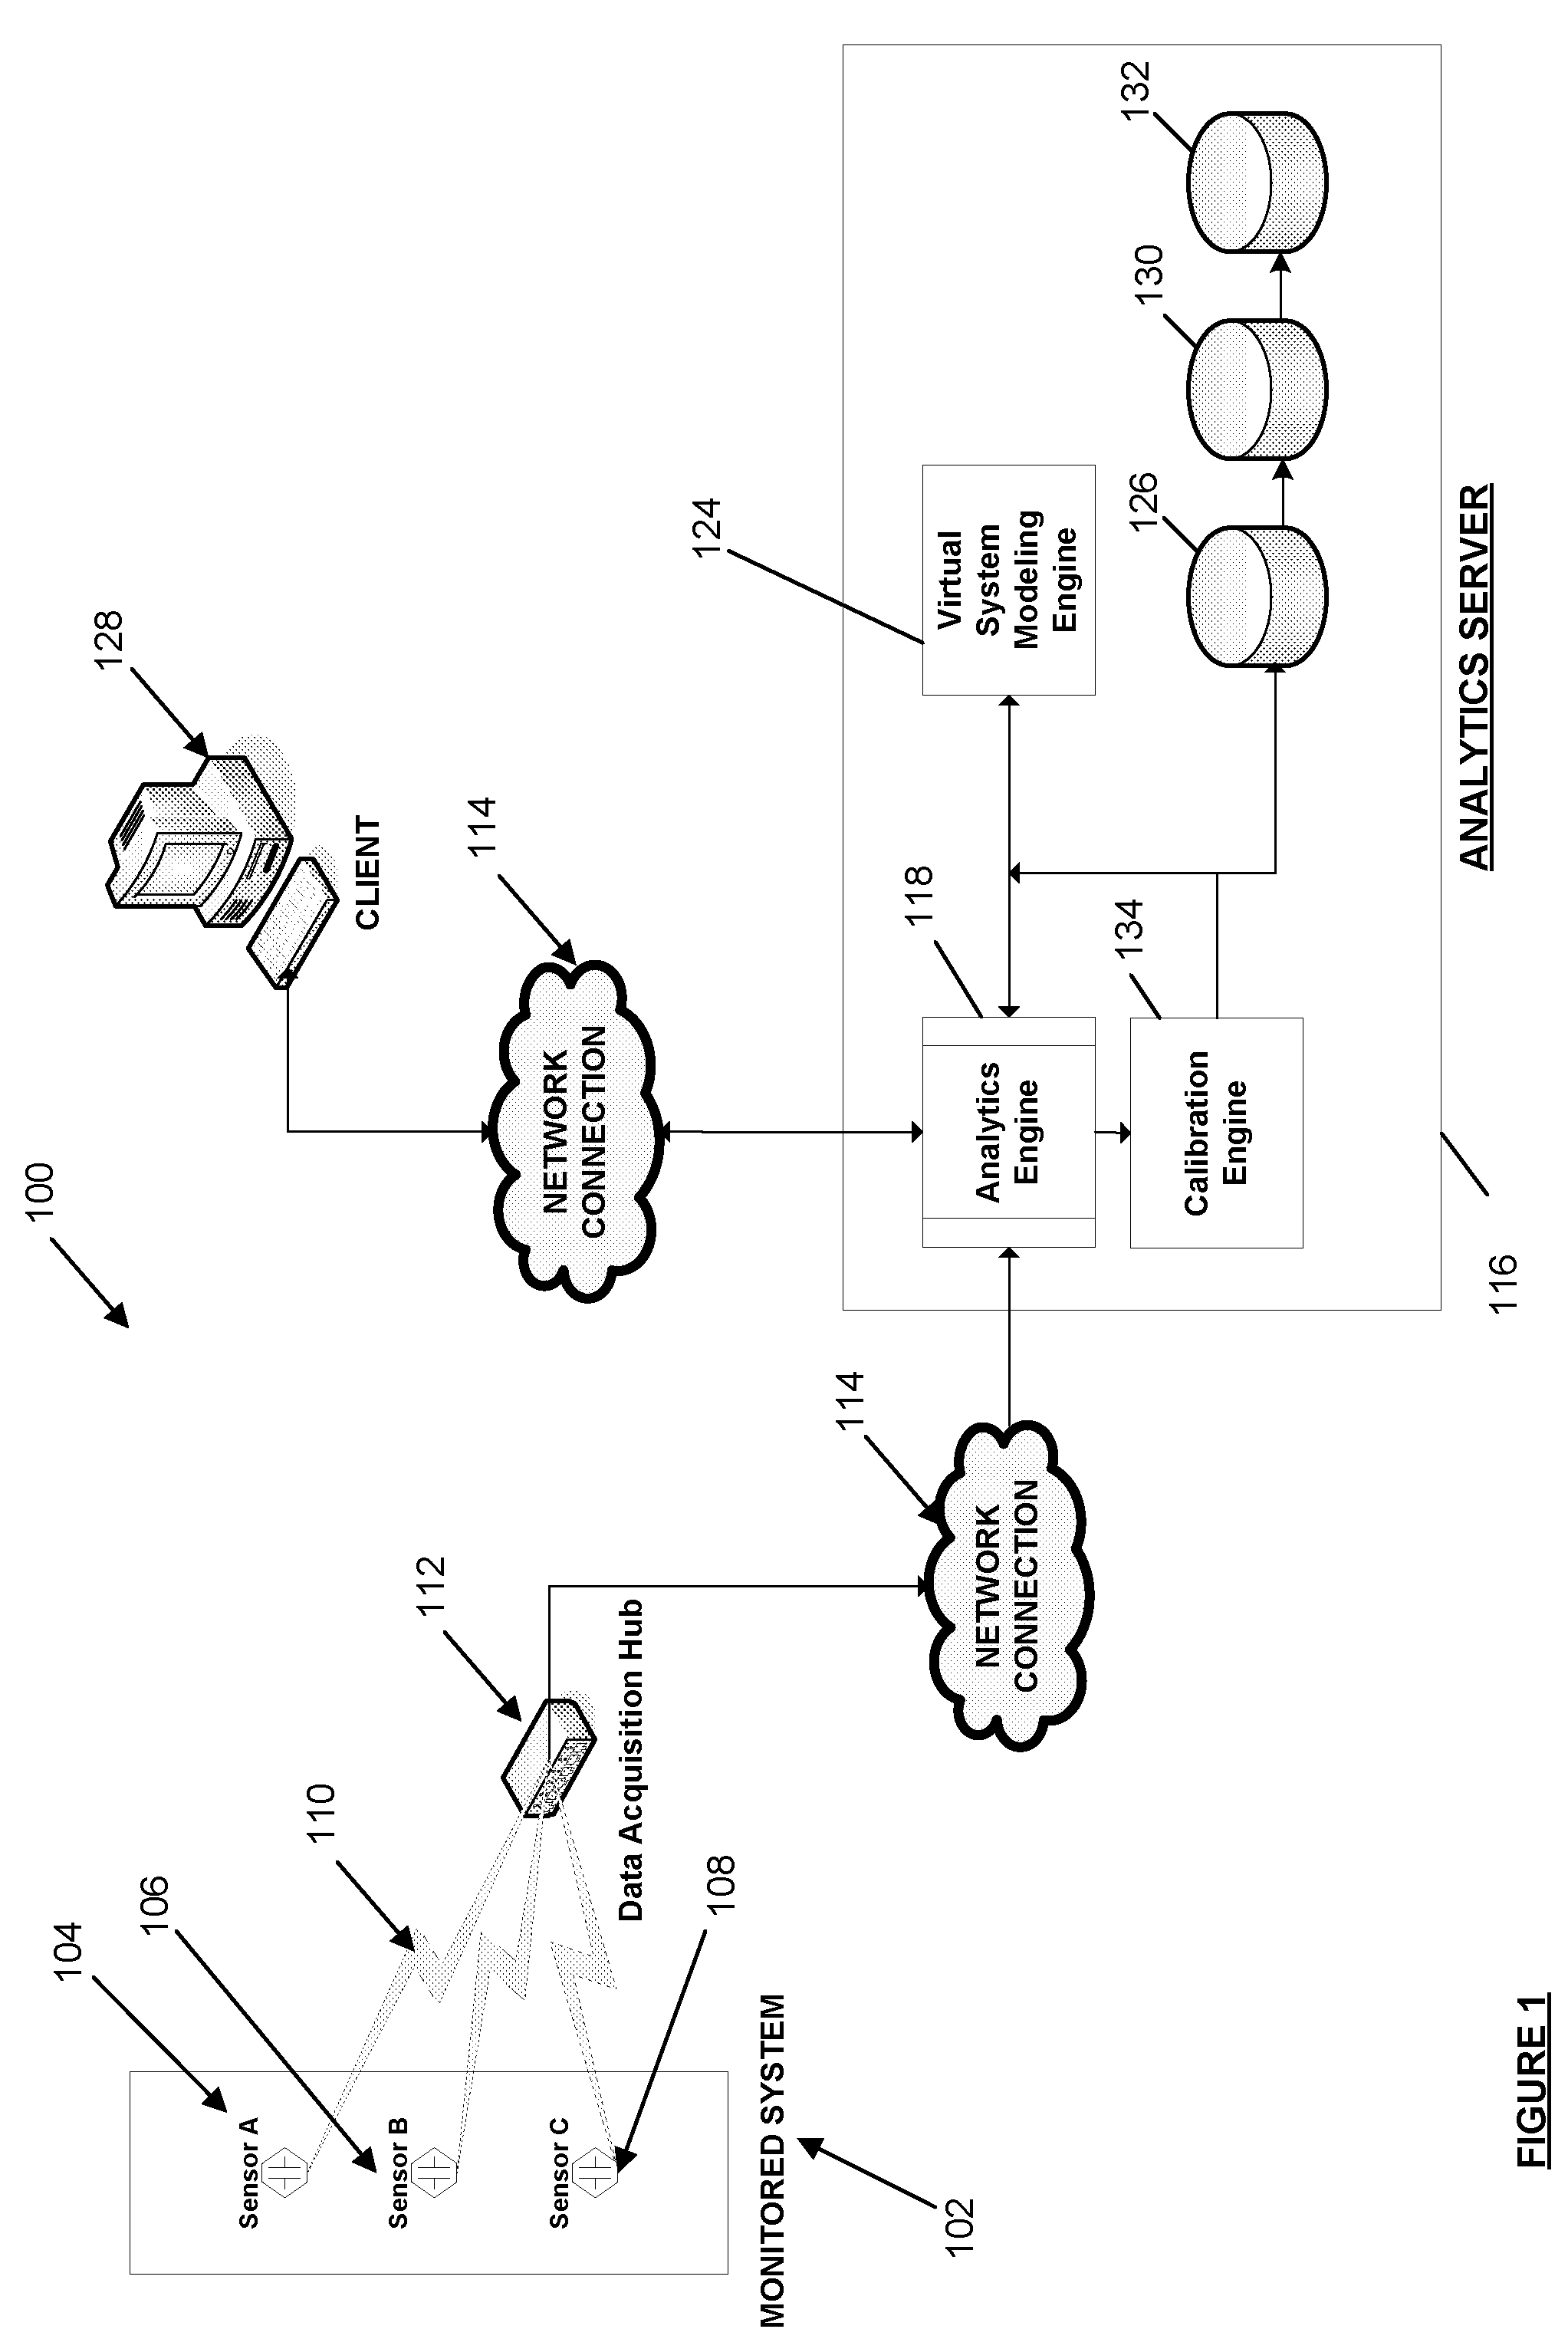 Method for predicting arc flash energy and ppe category within a real-time monitoring system